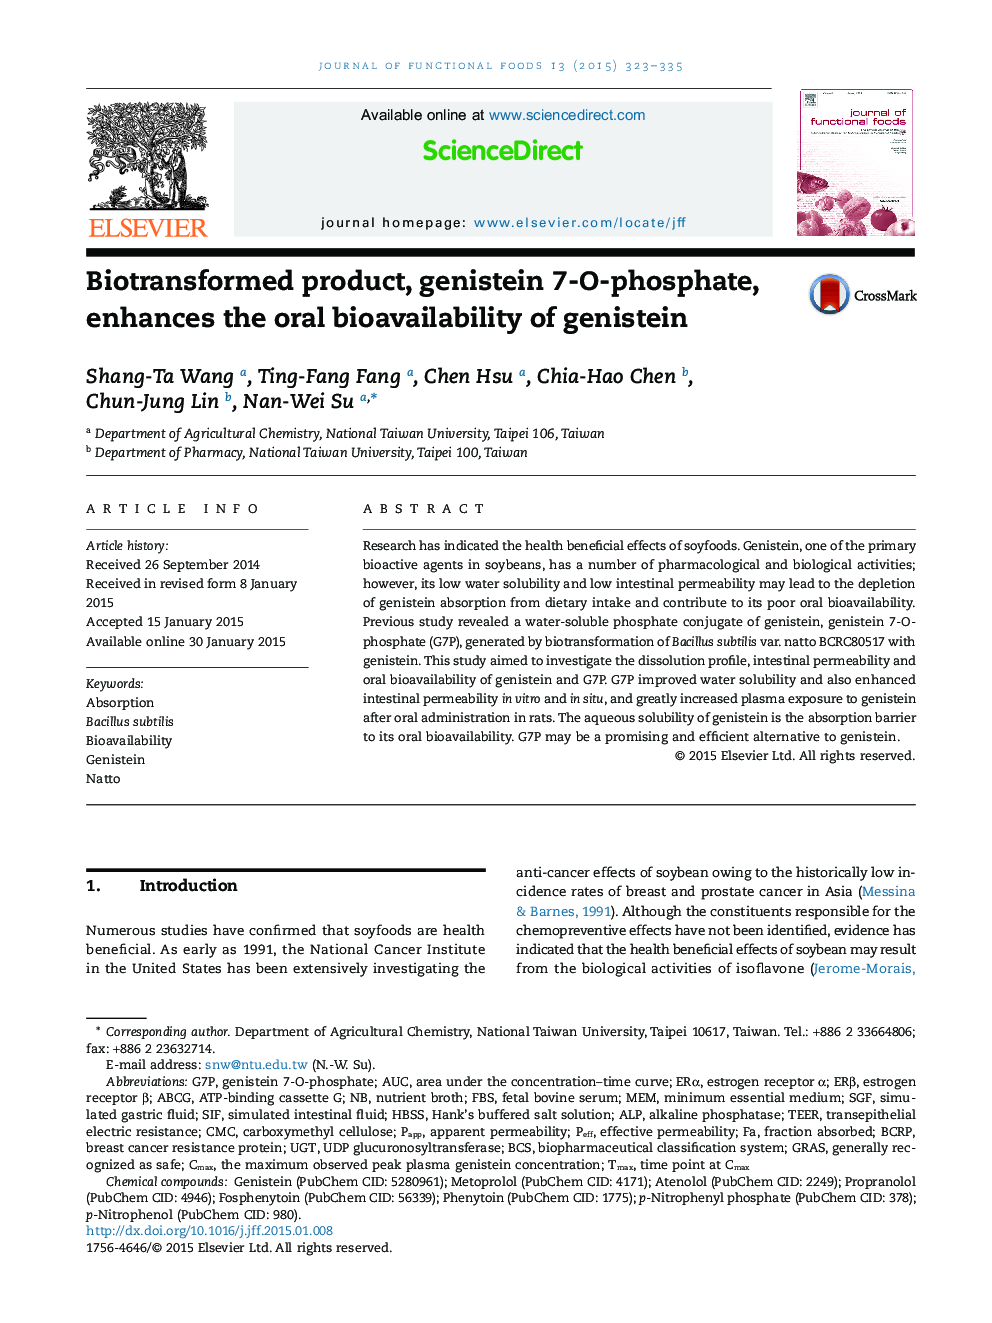 Biotransformed product, genistein 7-O-phosphate, enhances the oral bioavailability of genistein